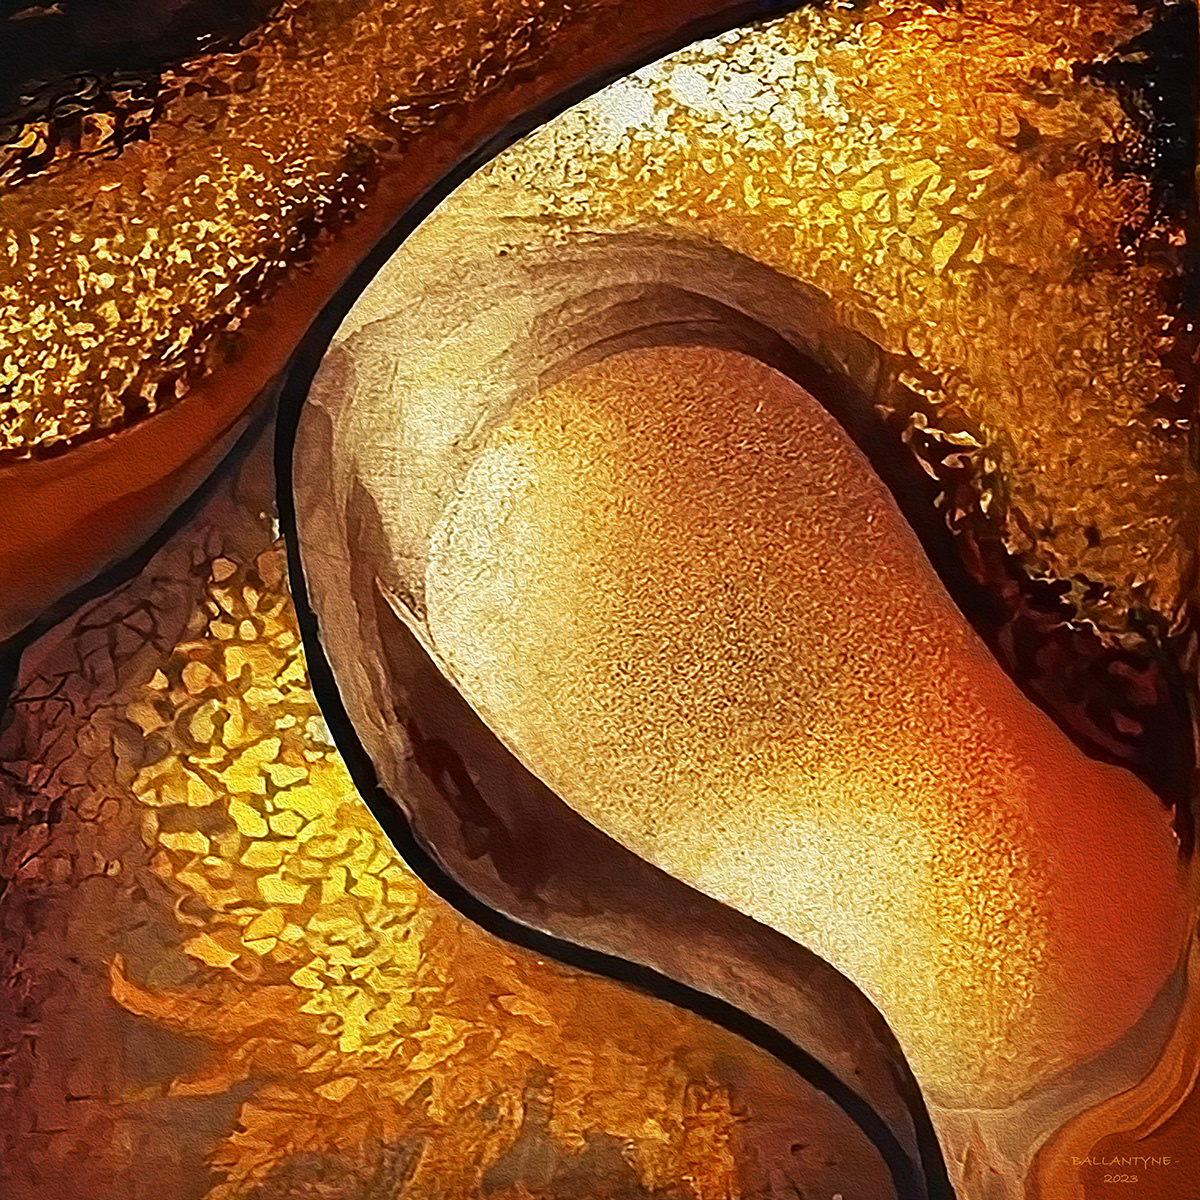 Abstract, golden, gilded, gold design for pillows, cushions, covers, mugs, greeting cards, tote bags